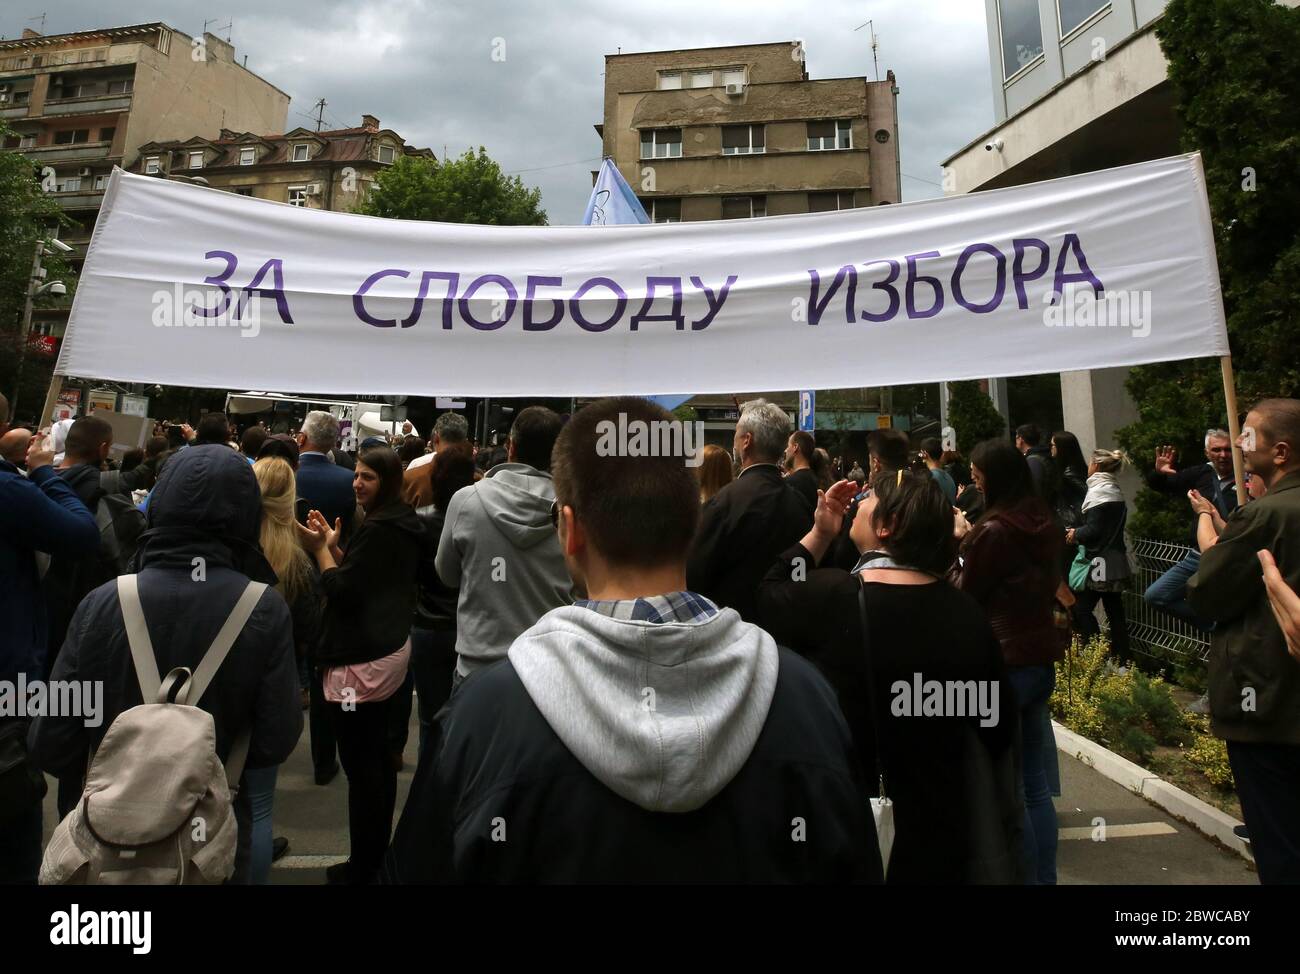 Belgrade, Serbia. 31 May 2020. Anti vaccination activists hold a banner reading in Serbian 'For freedom of choice' during a protest in Belgrade. People who do not support mandatory vaccination of children, call for a change of the legislation and allow the admission of unvaccinated children to schools. Stock Photo